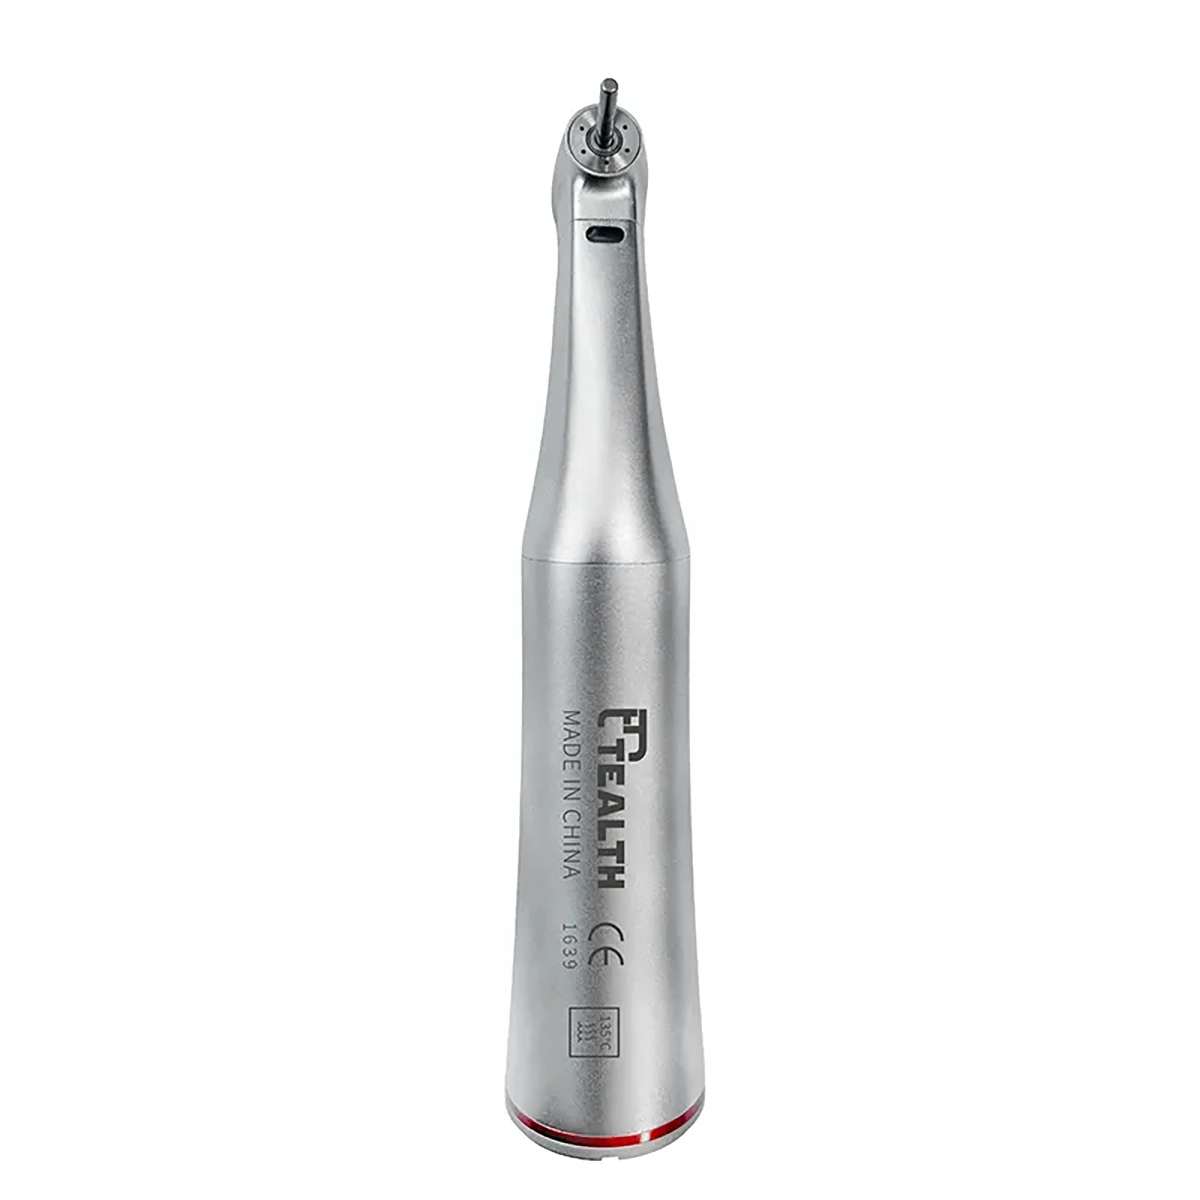 1:5 Tealth Speed Increasing LED Contra Angle Handpiece (4400799580259)